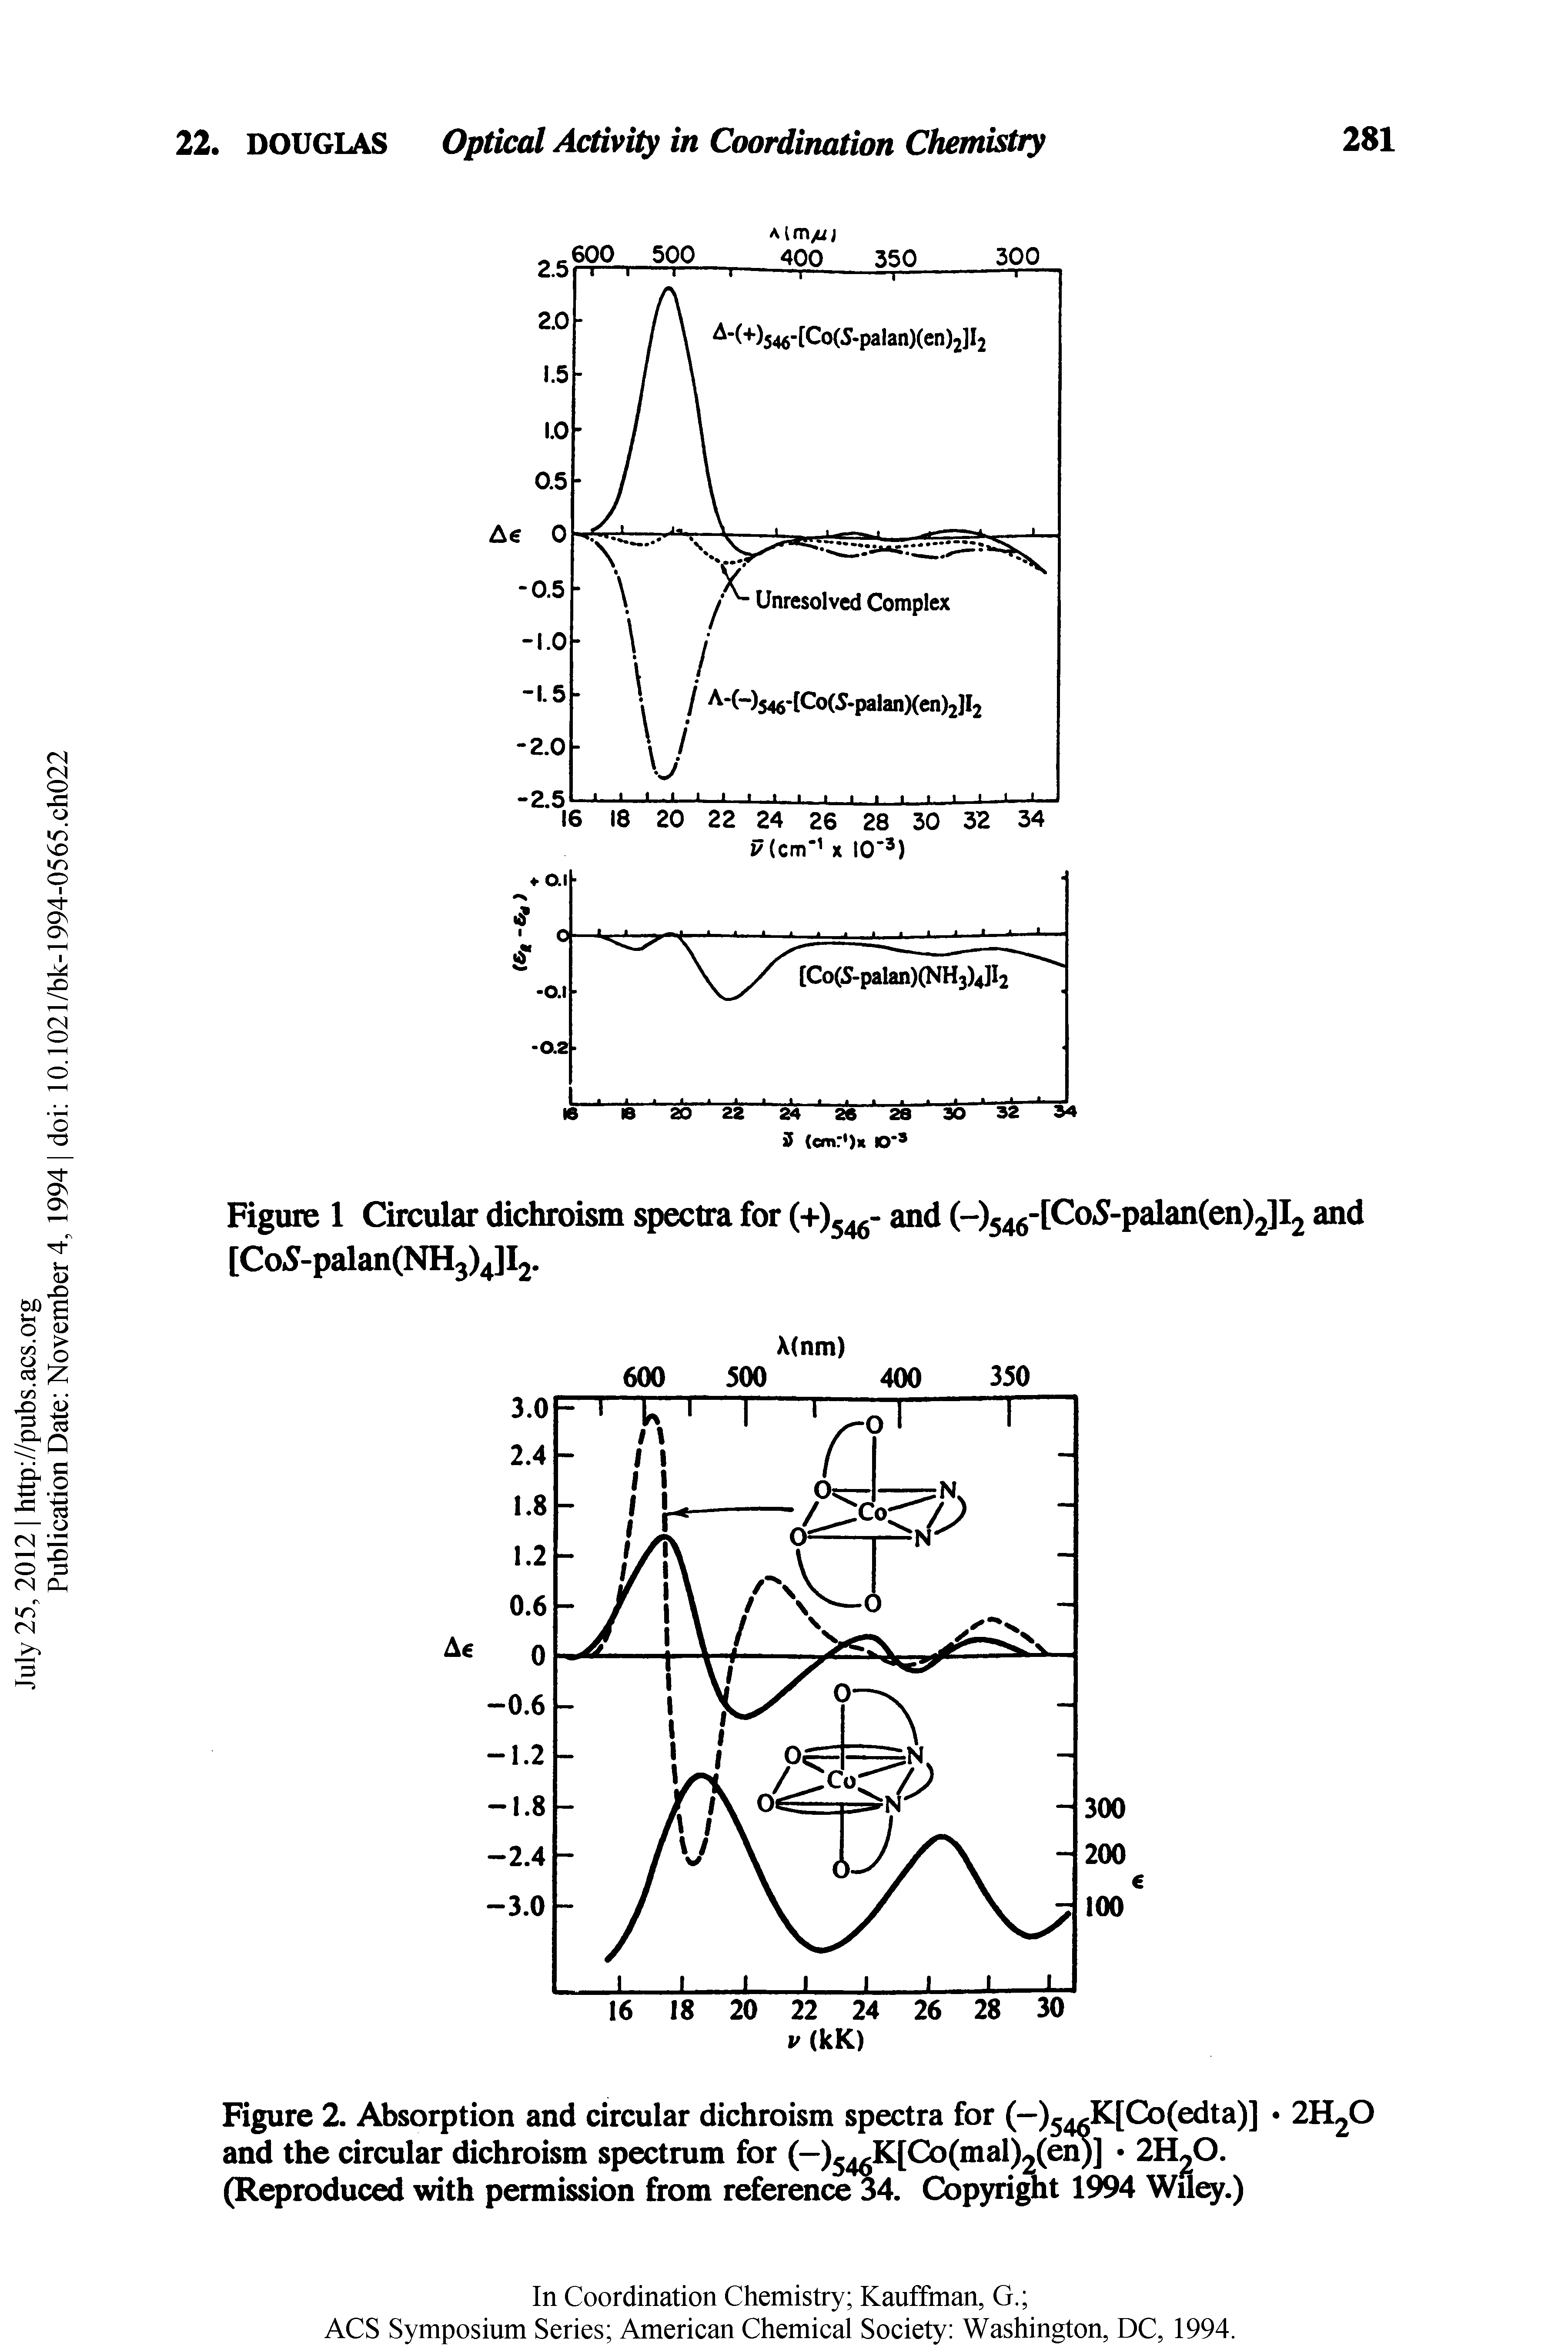 Figure 1 Circular dichroism spectra for and (-) -[CoS-peim cn)Jil2 and [Co5-palan(NH3)4]l2.